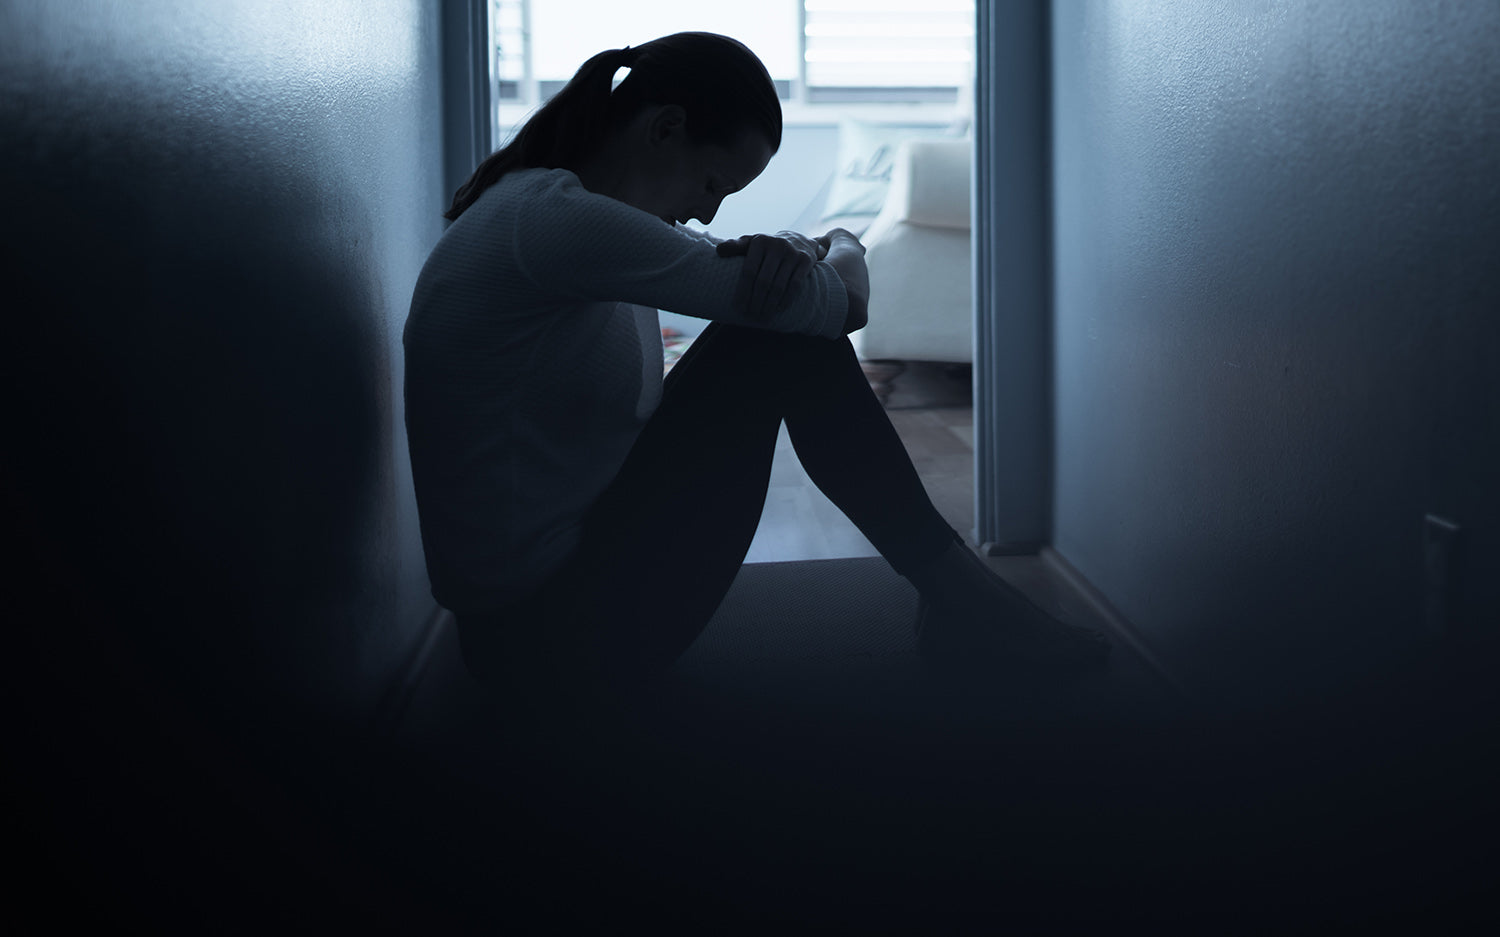 Youth Suicide: The Other Public Health Crisis